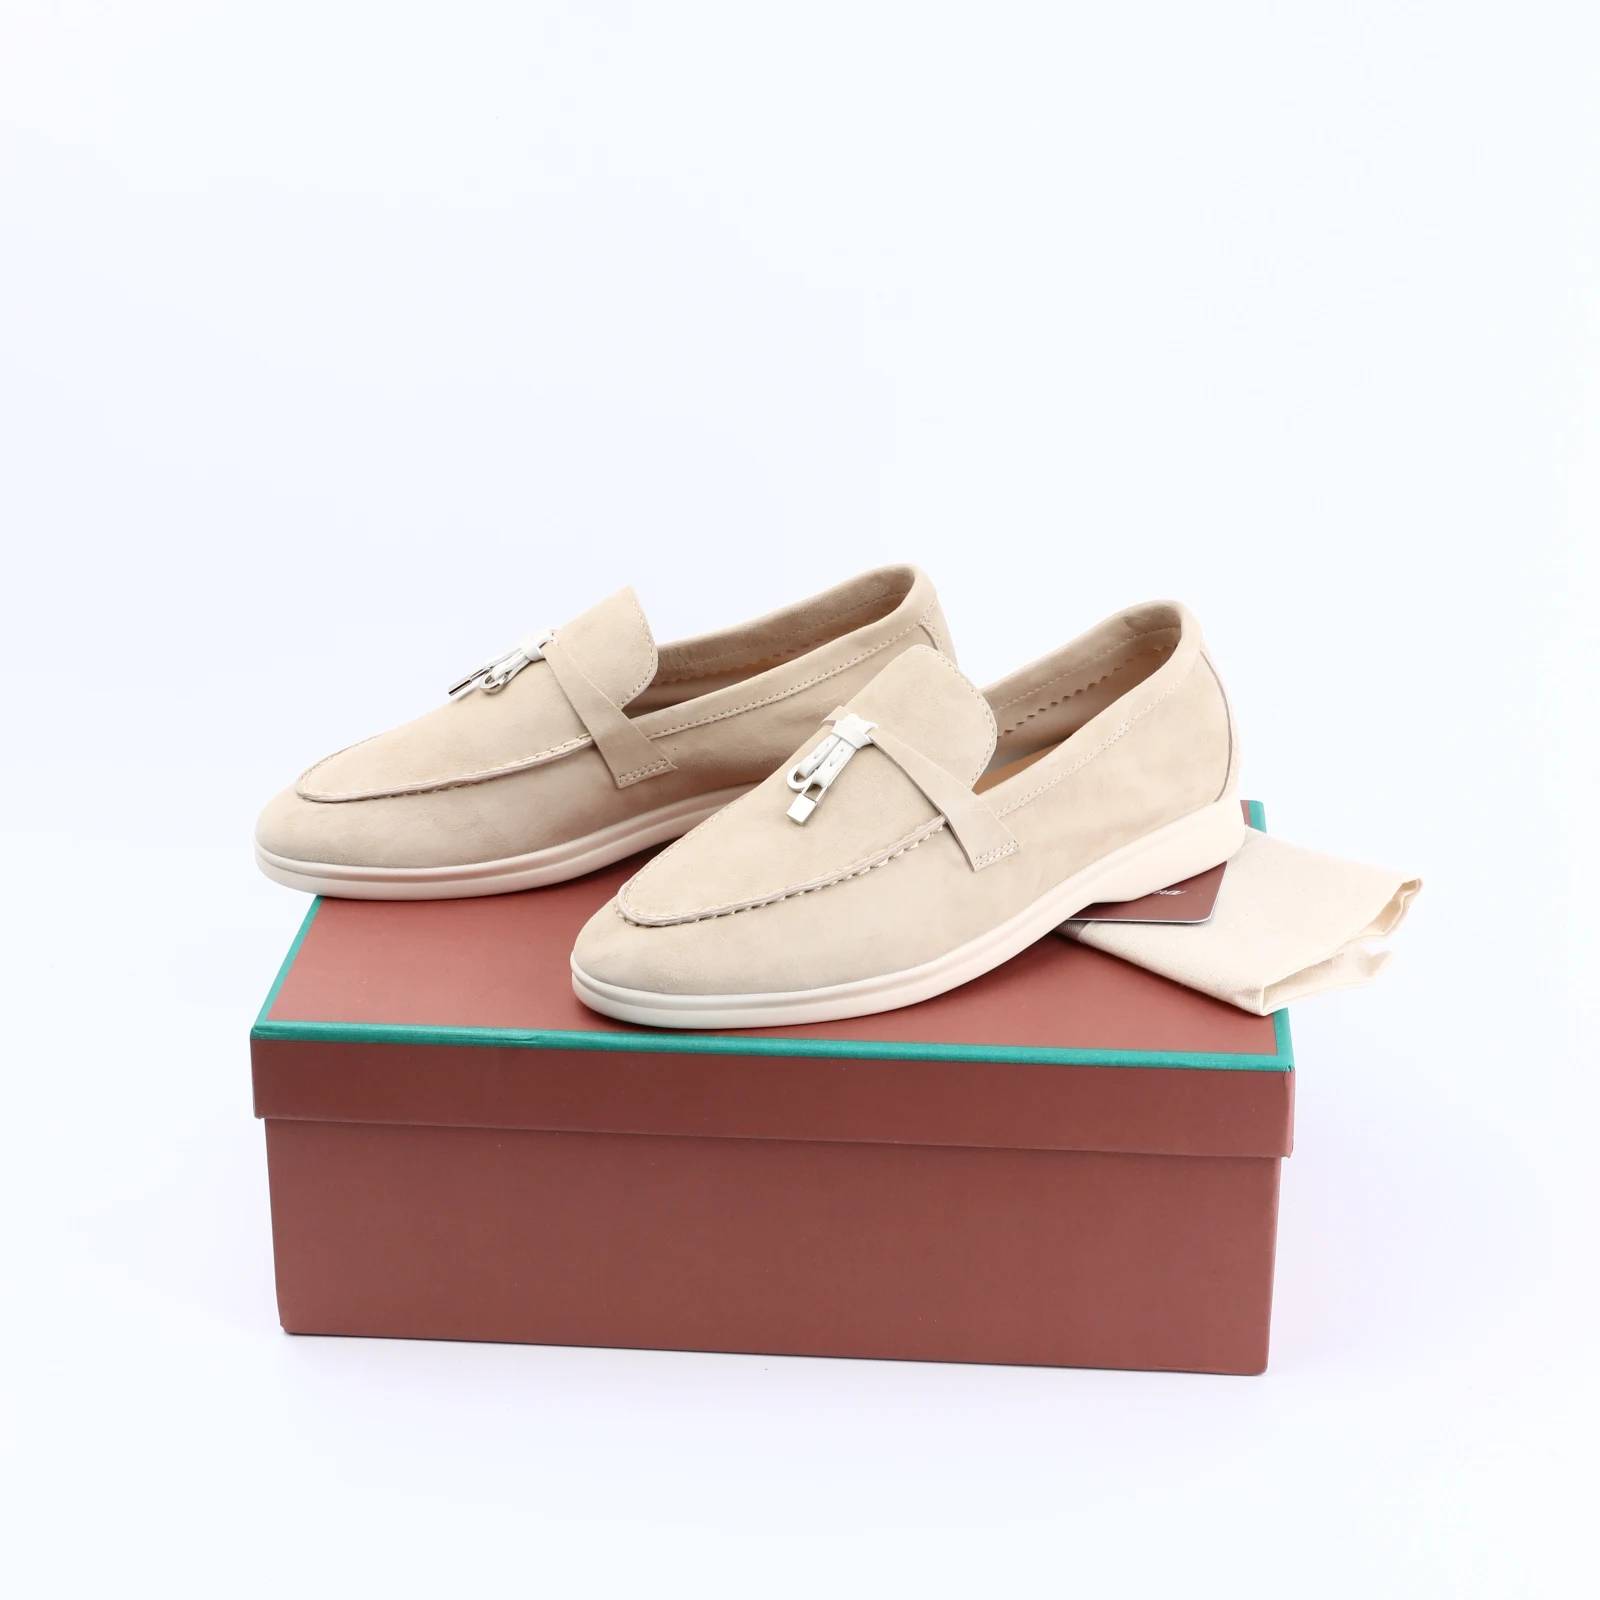 Moccasines Suede Loafers Summer Walk Shoes Women Spring Autumn Fashion C... - $146.21